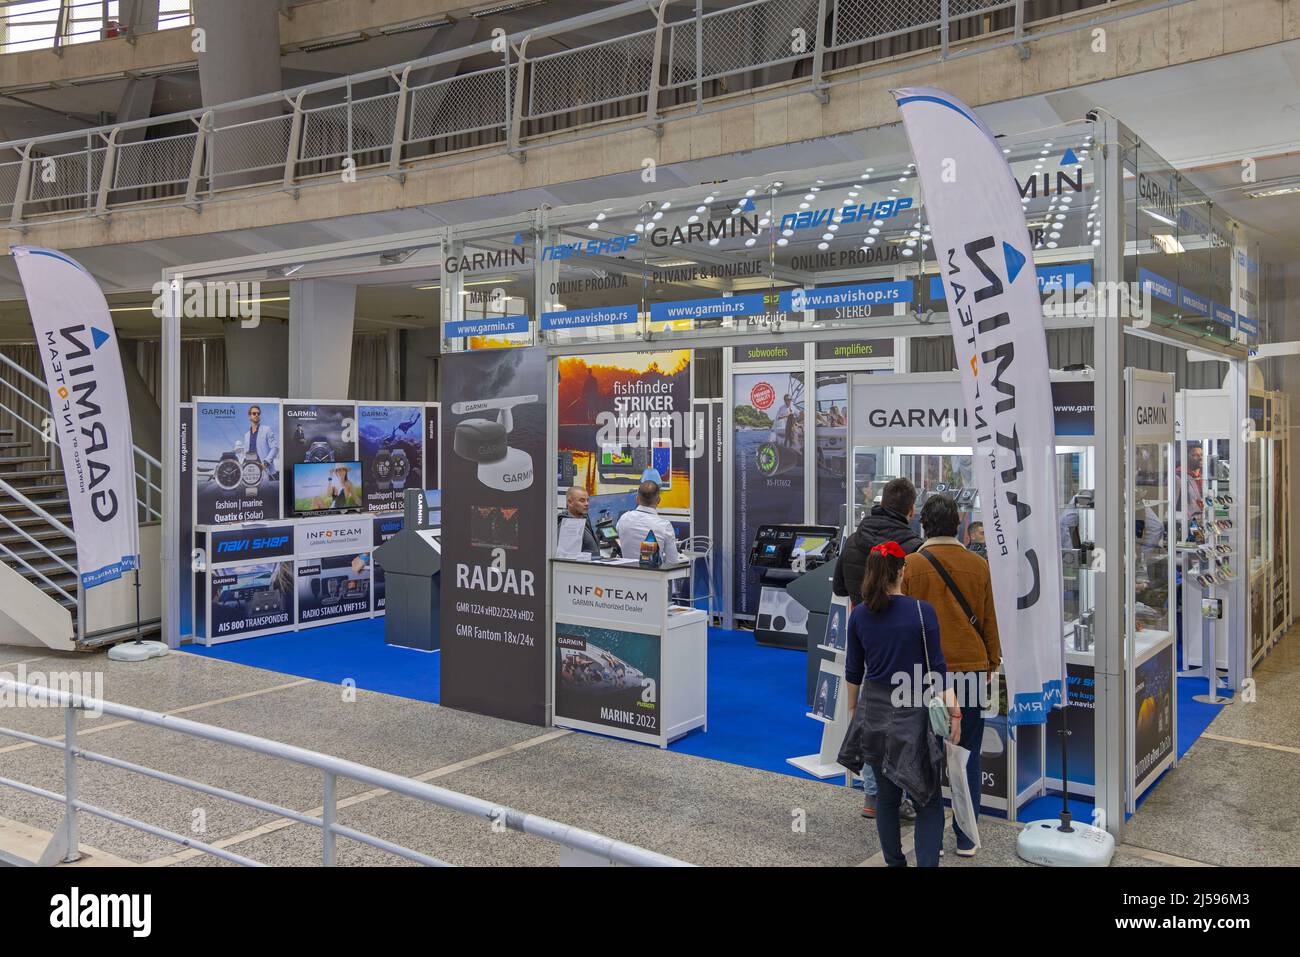 Belgrade, Serbia - April 07, 2022: Garmin Stand at Nautical Hunting Fishing Show Expo in Large Fairground Hall. Stock Photo